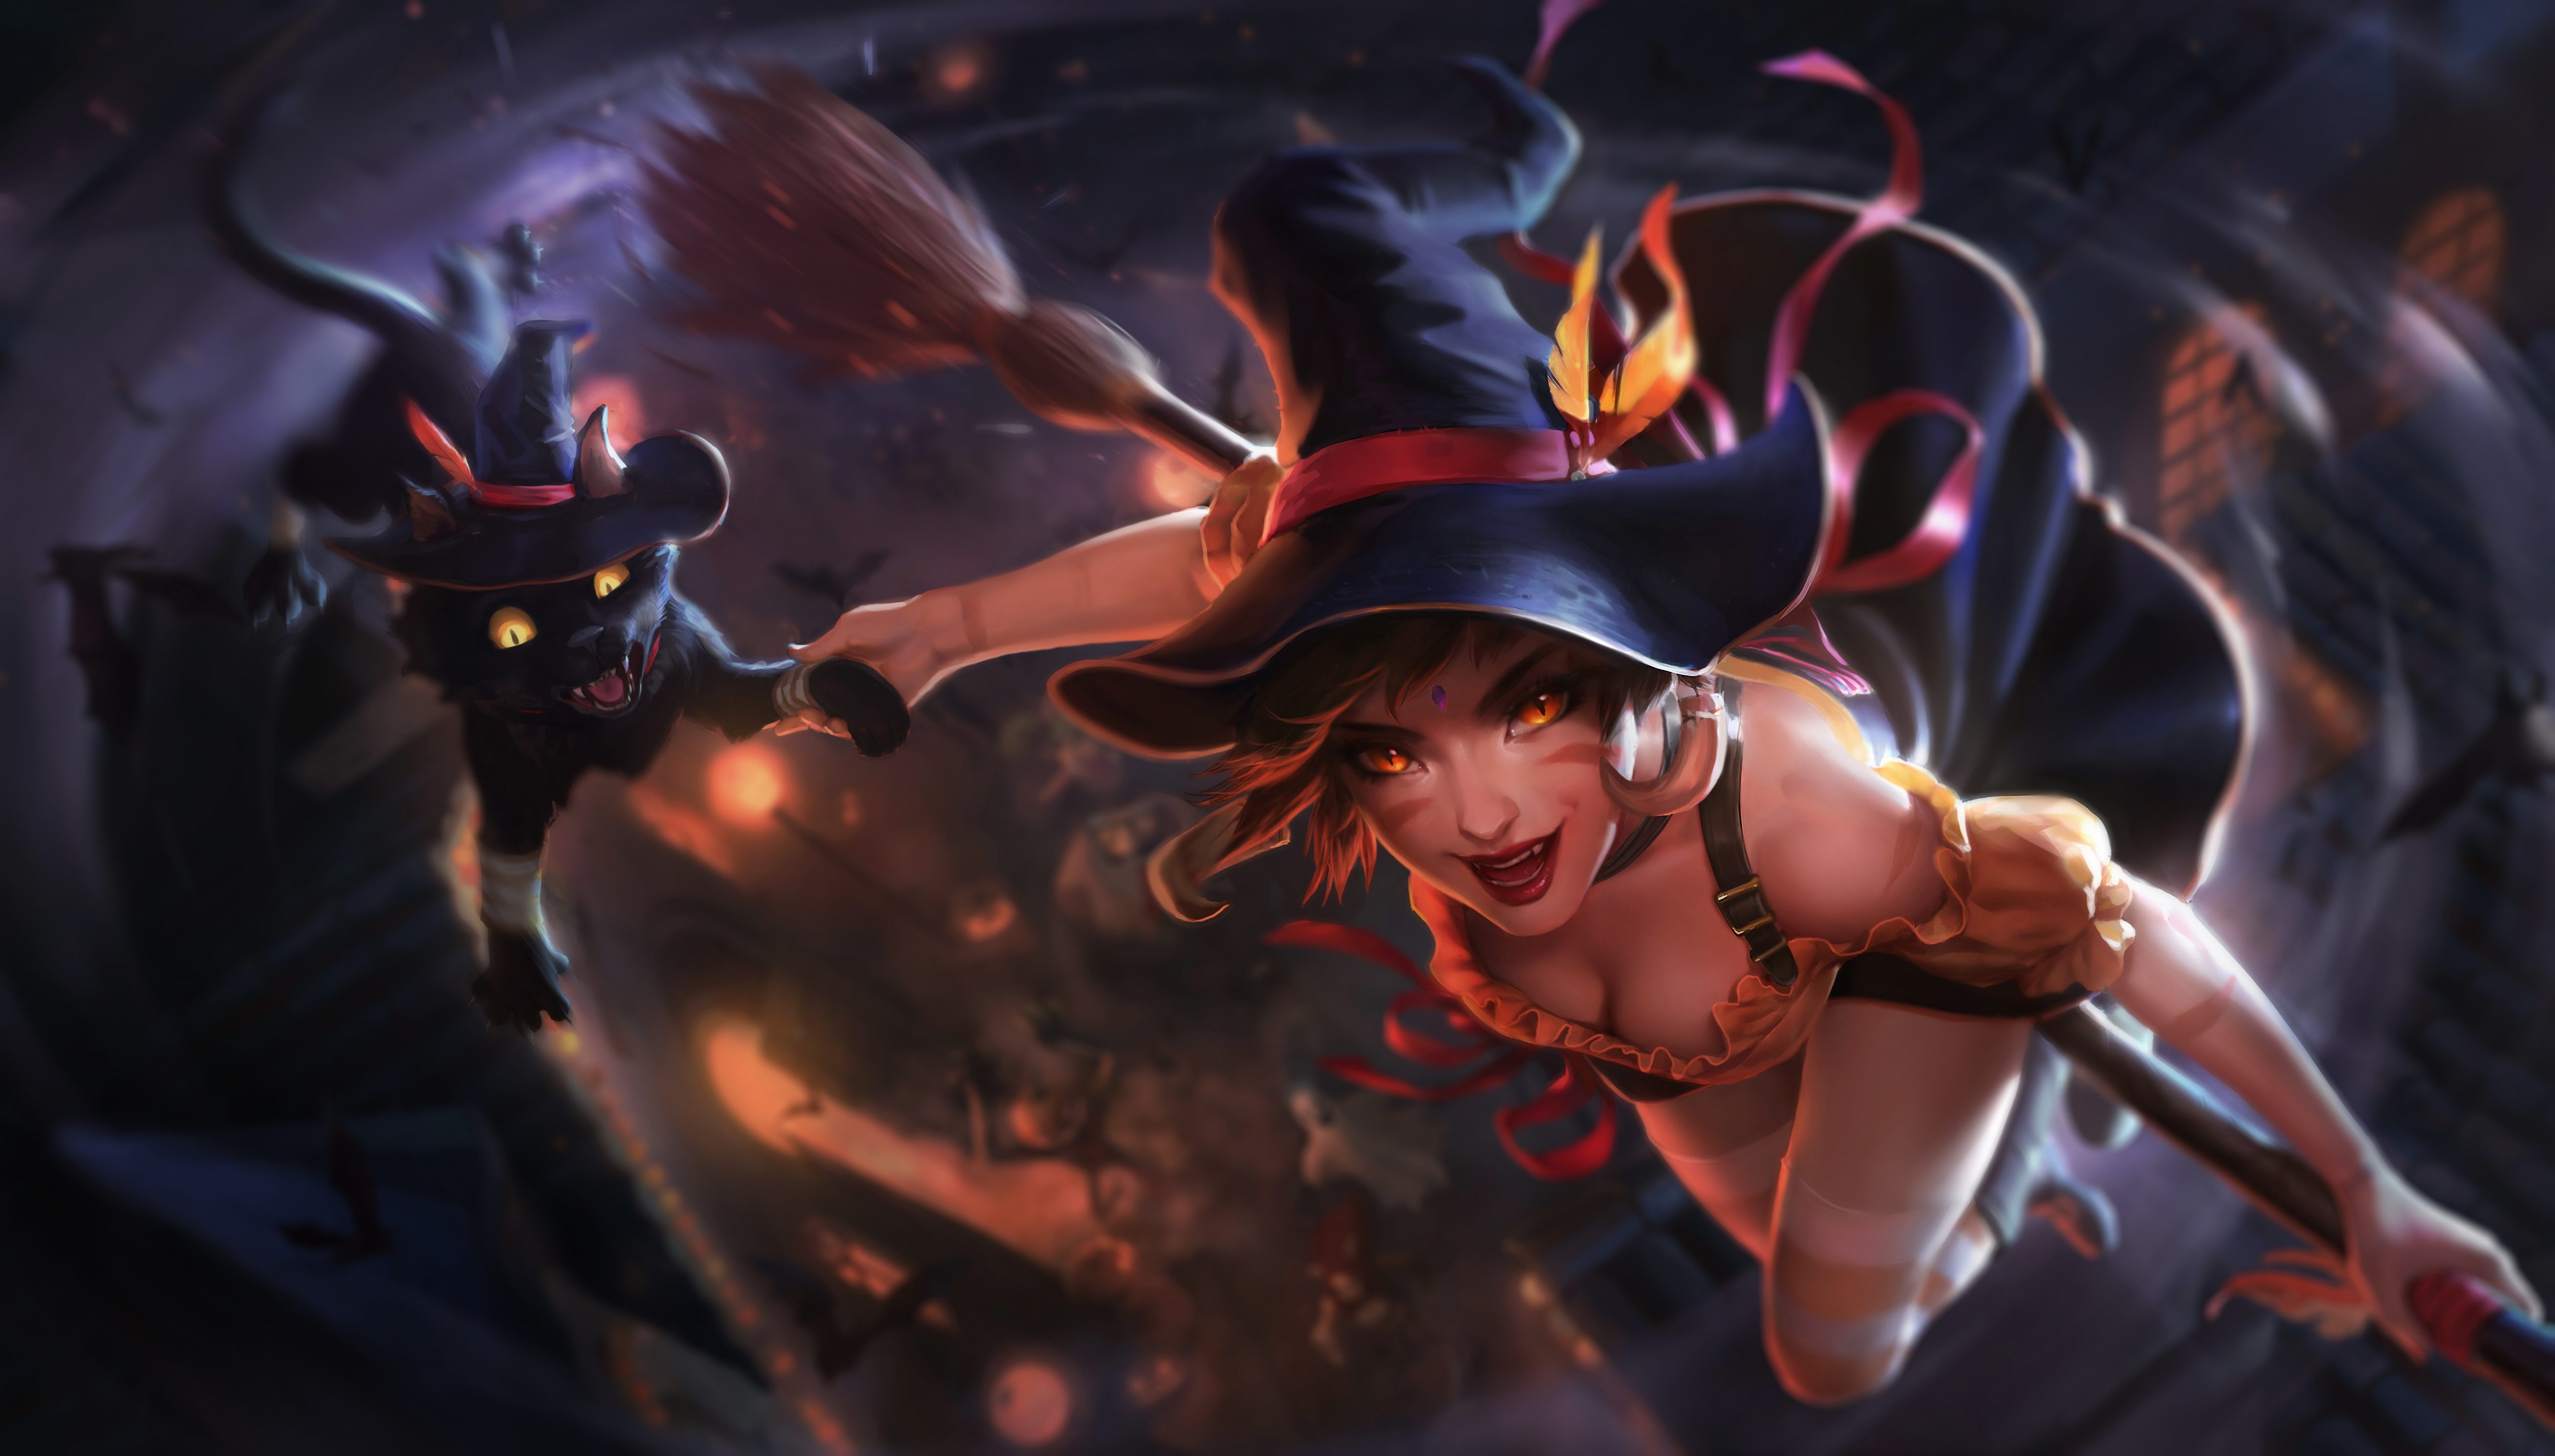 Anime 5000x2850 Halloween witch hat hat witch cleavage League of Legends thigh-highs heels lolita fashion see-through clothing wings weapon anime girls anime fantasy girl Janna (League of Legends)